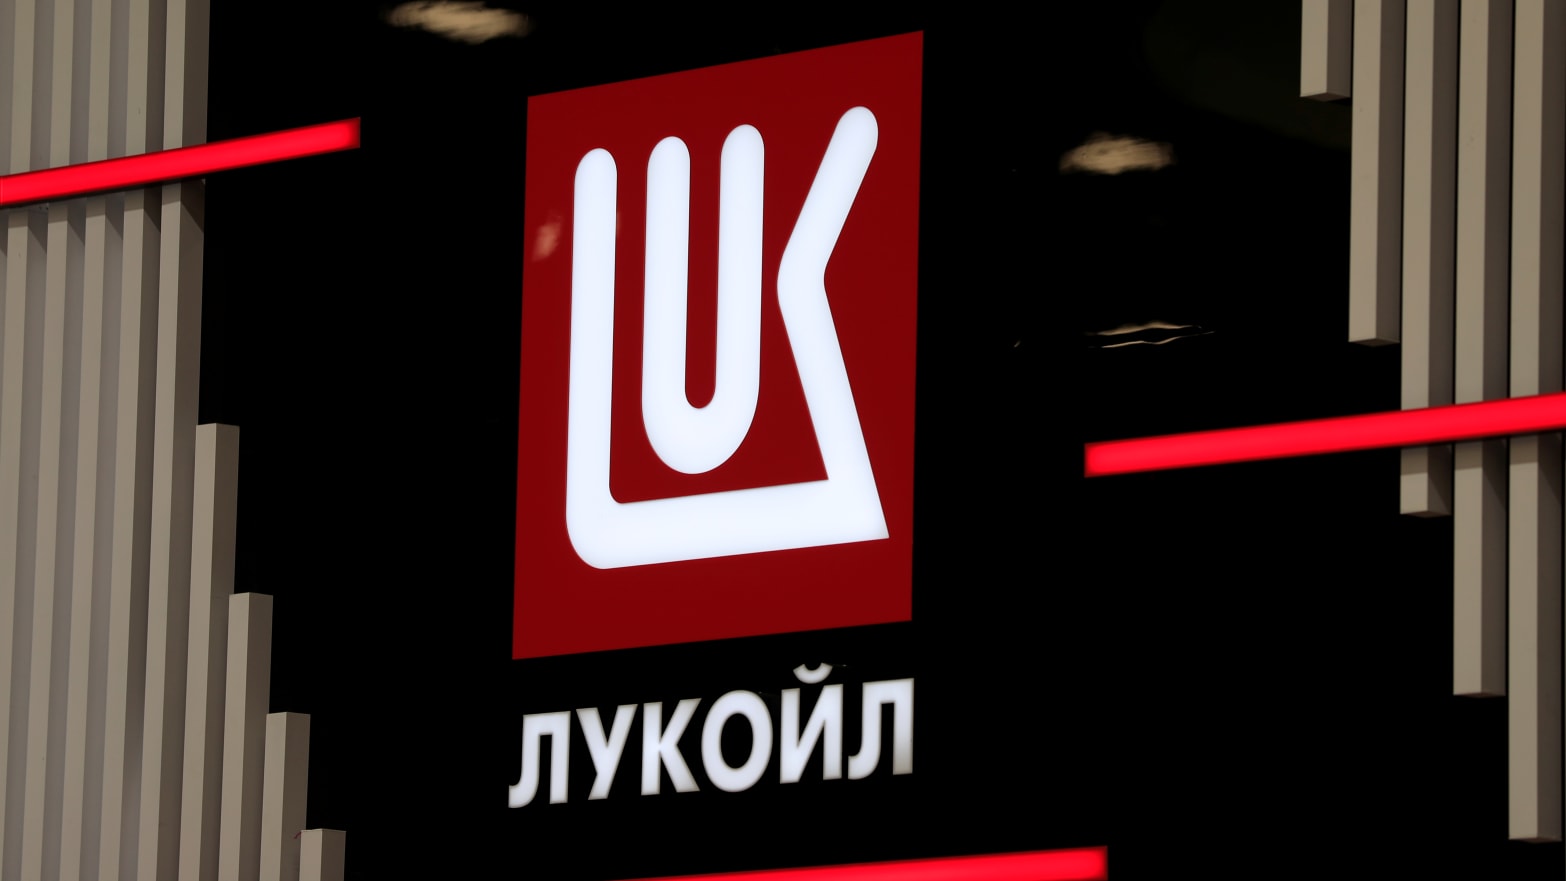 A Lukoil sign.